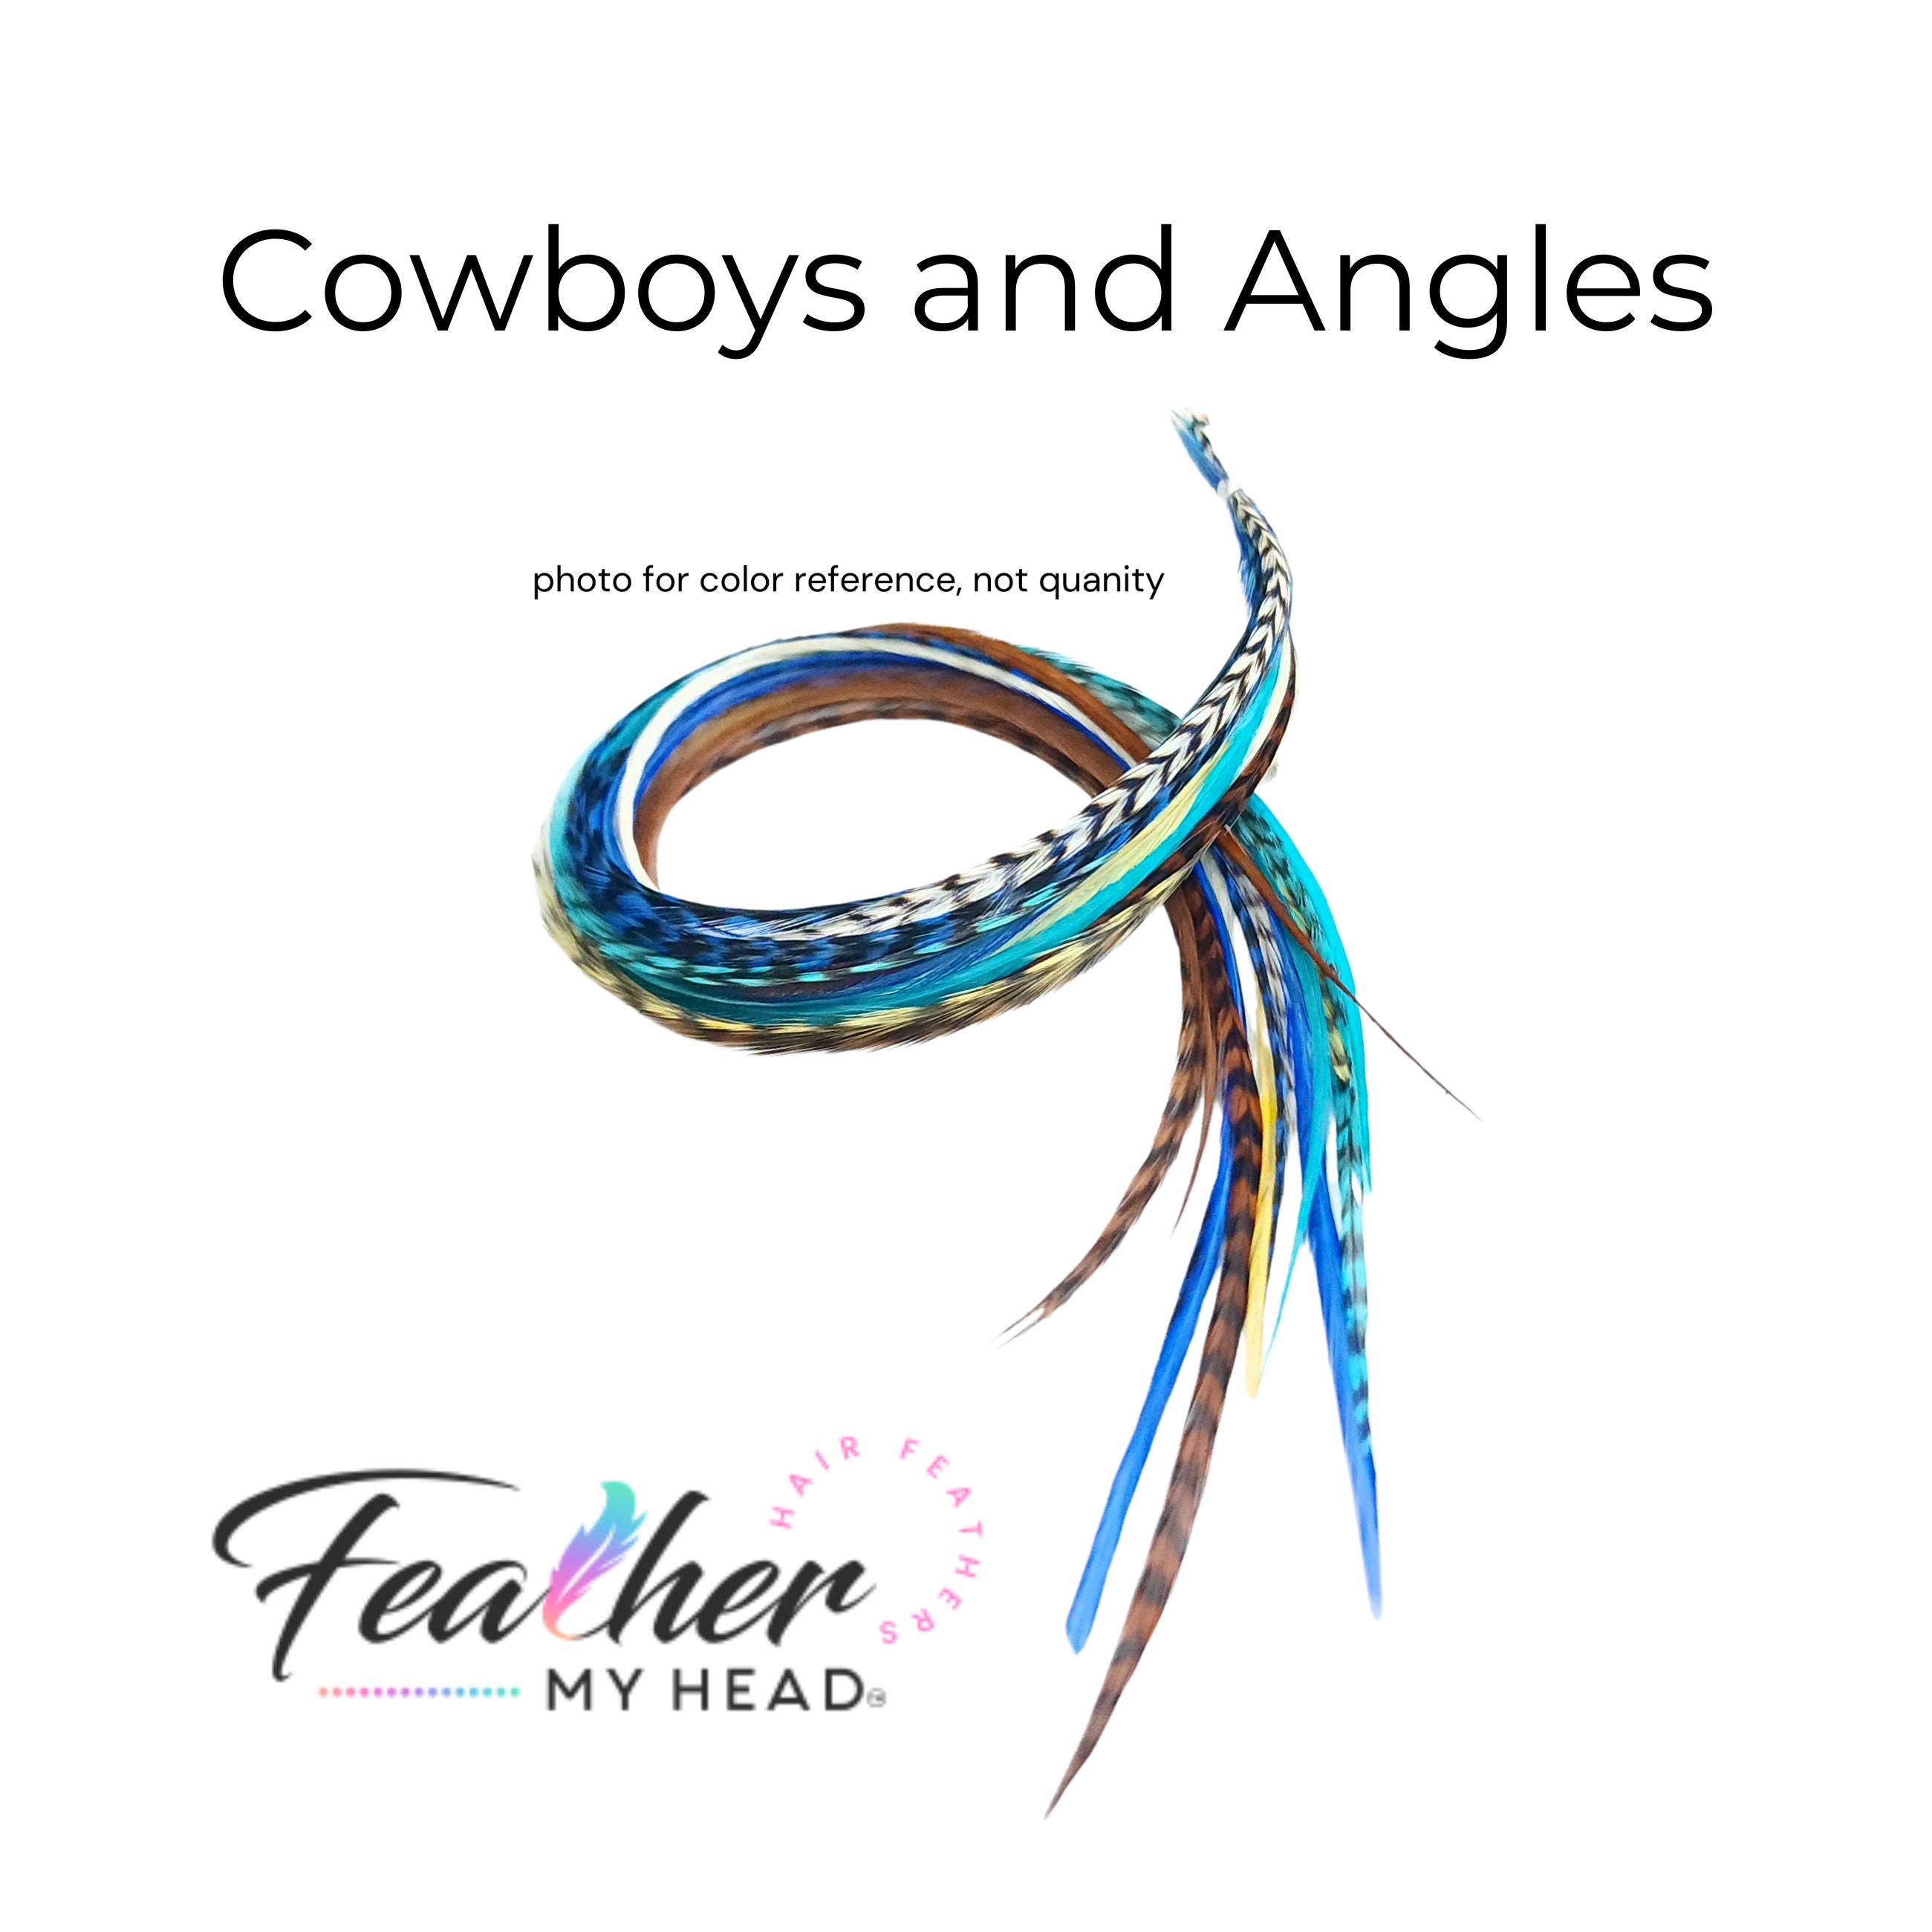 Feather Hair Extension Kit, 6 Real Feathers, Pick Your Length Short to Mega  Long 16 in Hair Feathers, Optional DIY Kit, Sedona Mix 